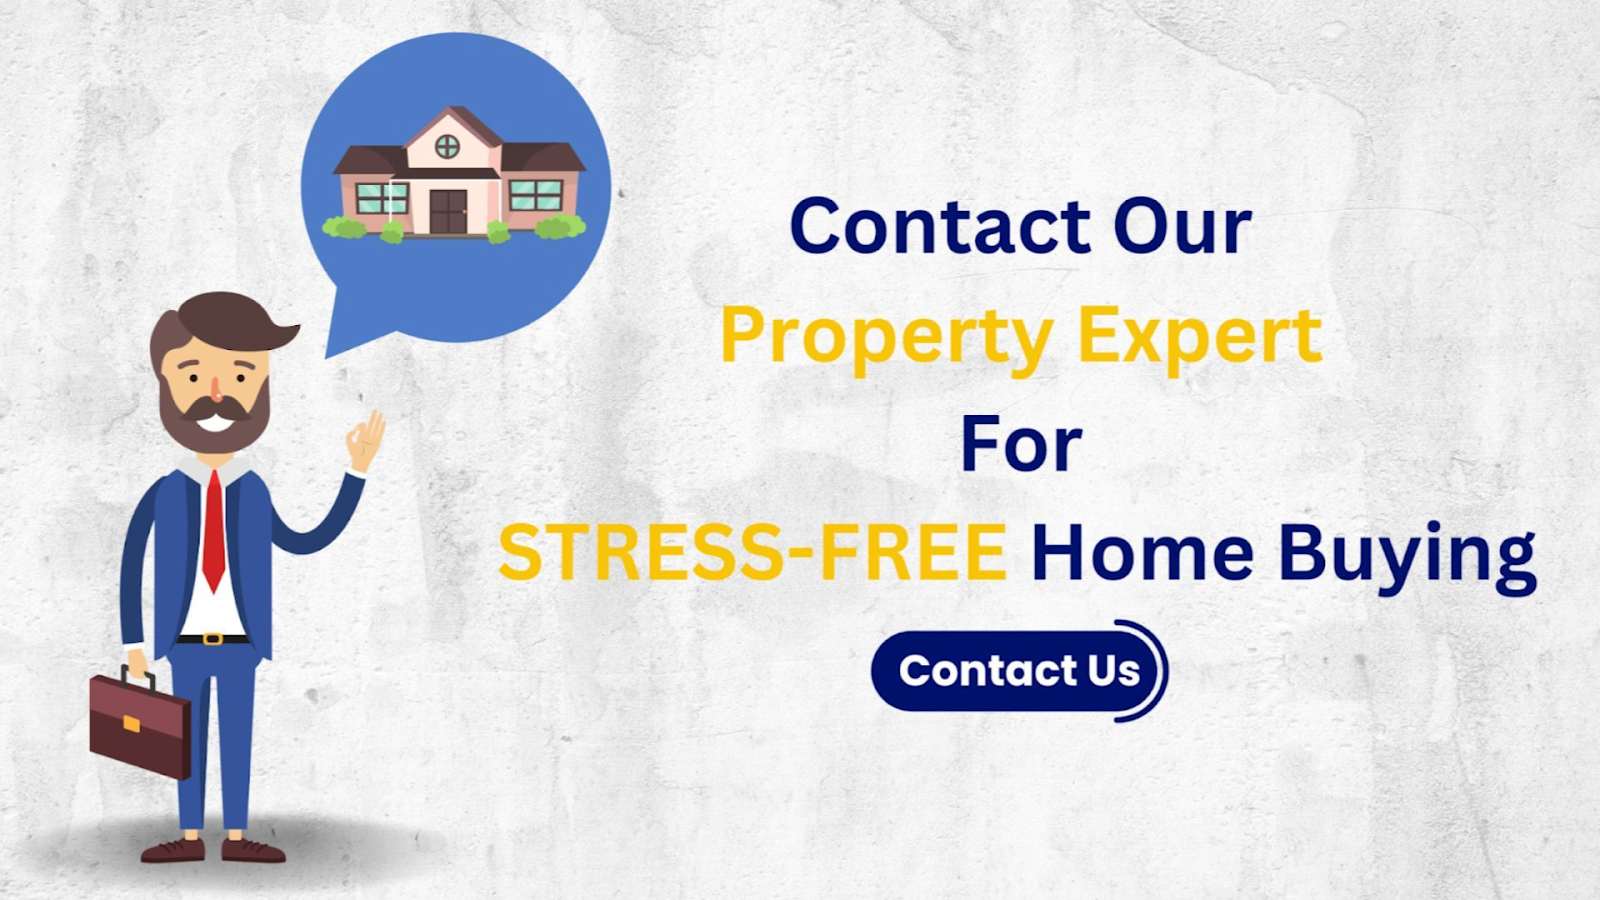 Contact a PropertyCloud real estate expert for a hassle-free house purchase.